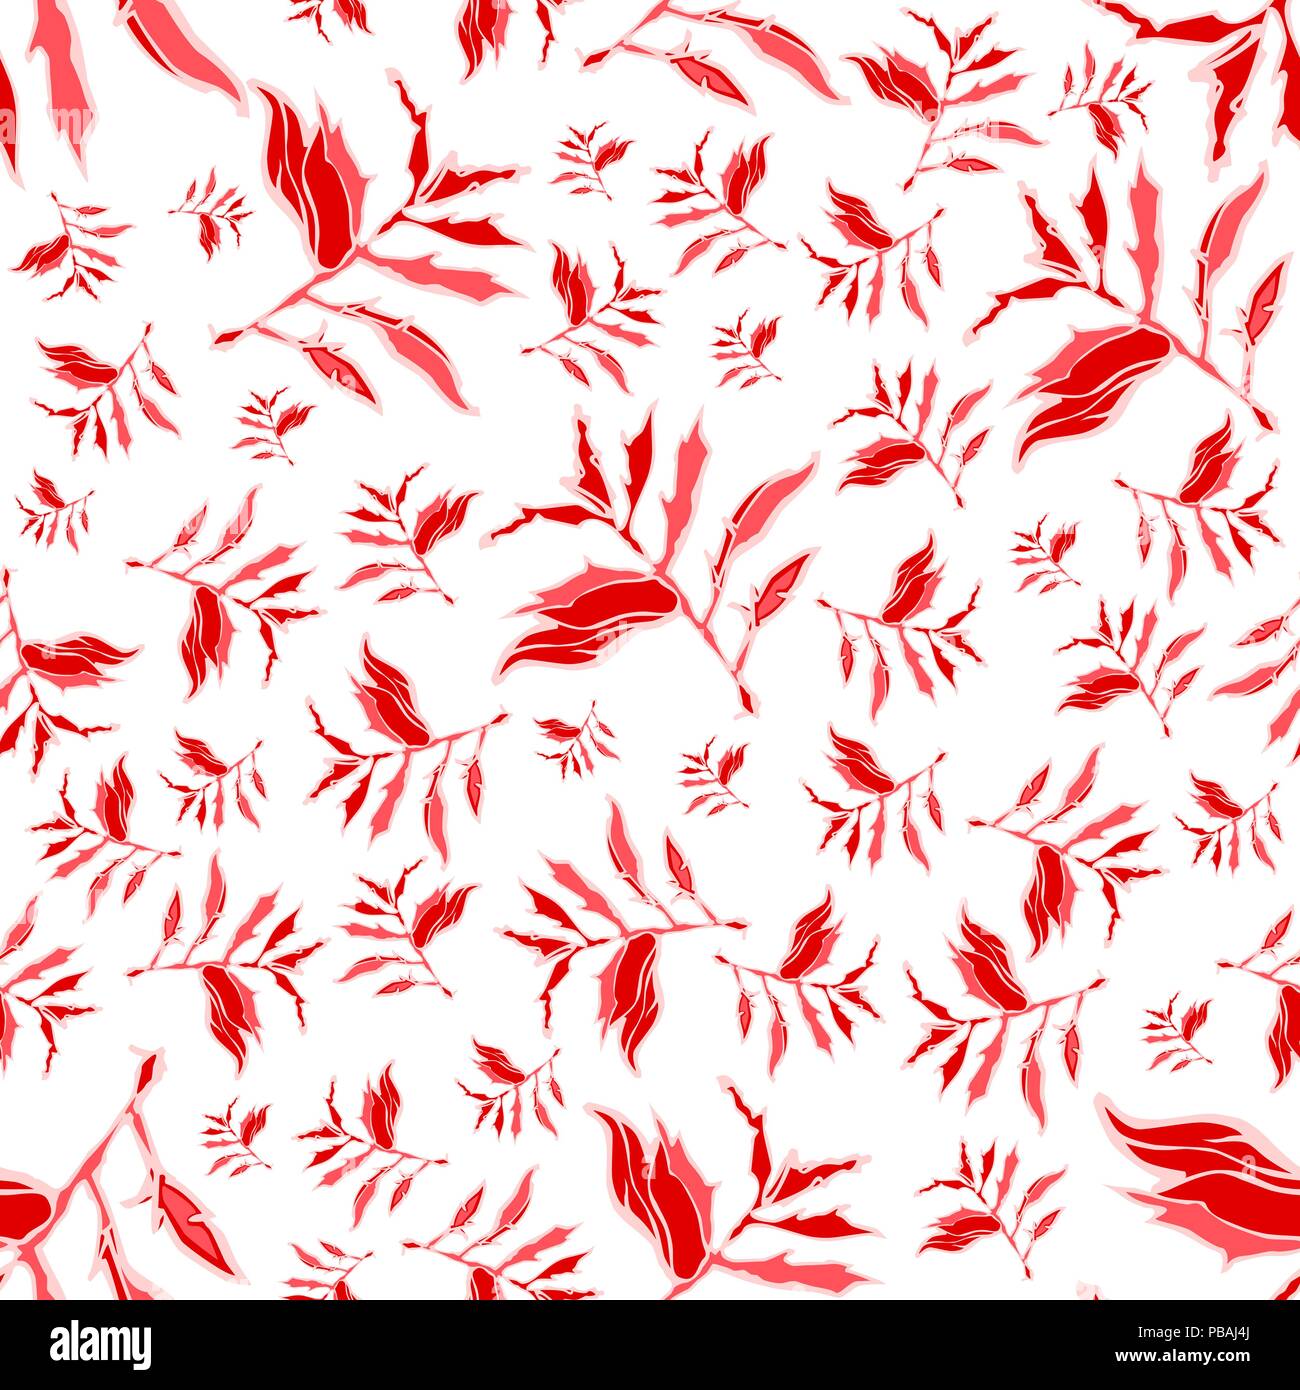 Floral seamless pattern. Red and white fabric. Vector texture.  Square format. Stock Vector